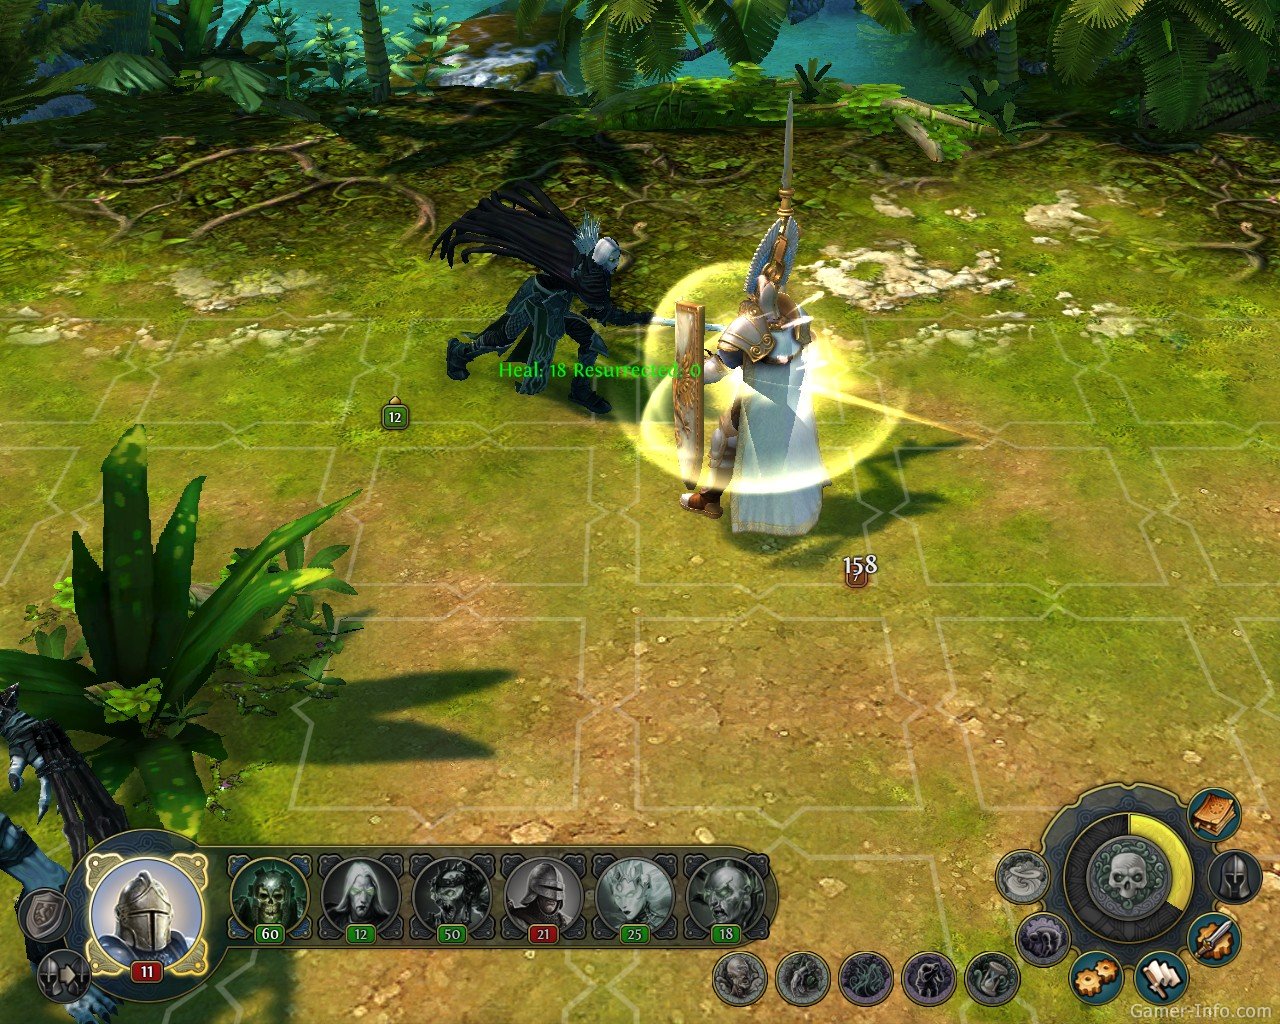 Might and heroes vi. Герои 6. Heroes and Magic 6. Might & Magic: Heroes vi. Might and Magic 6 игра.